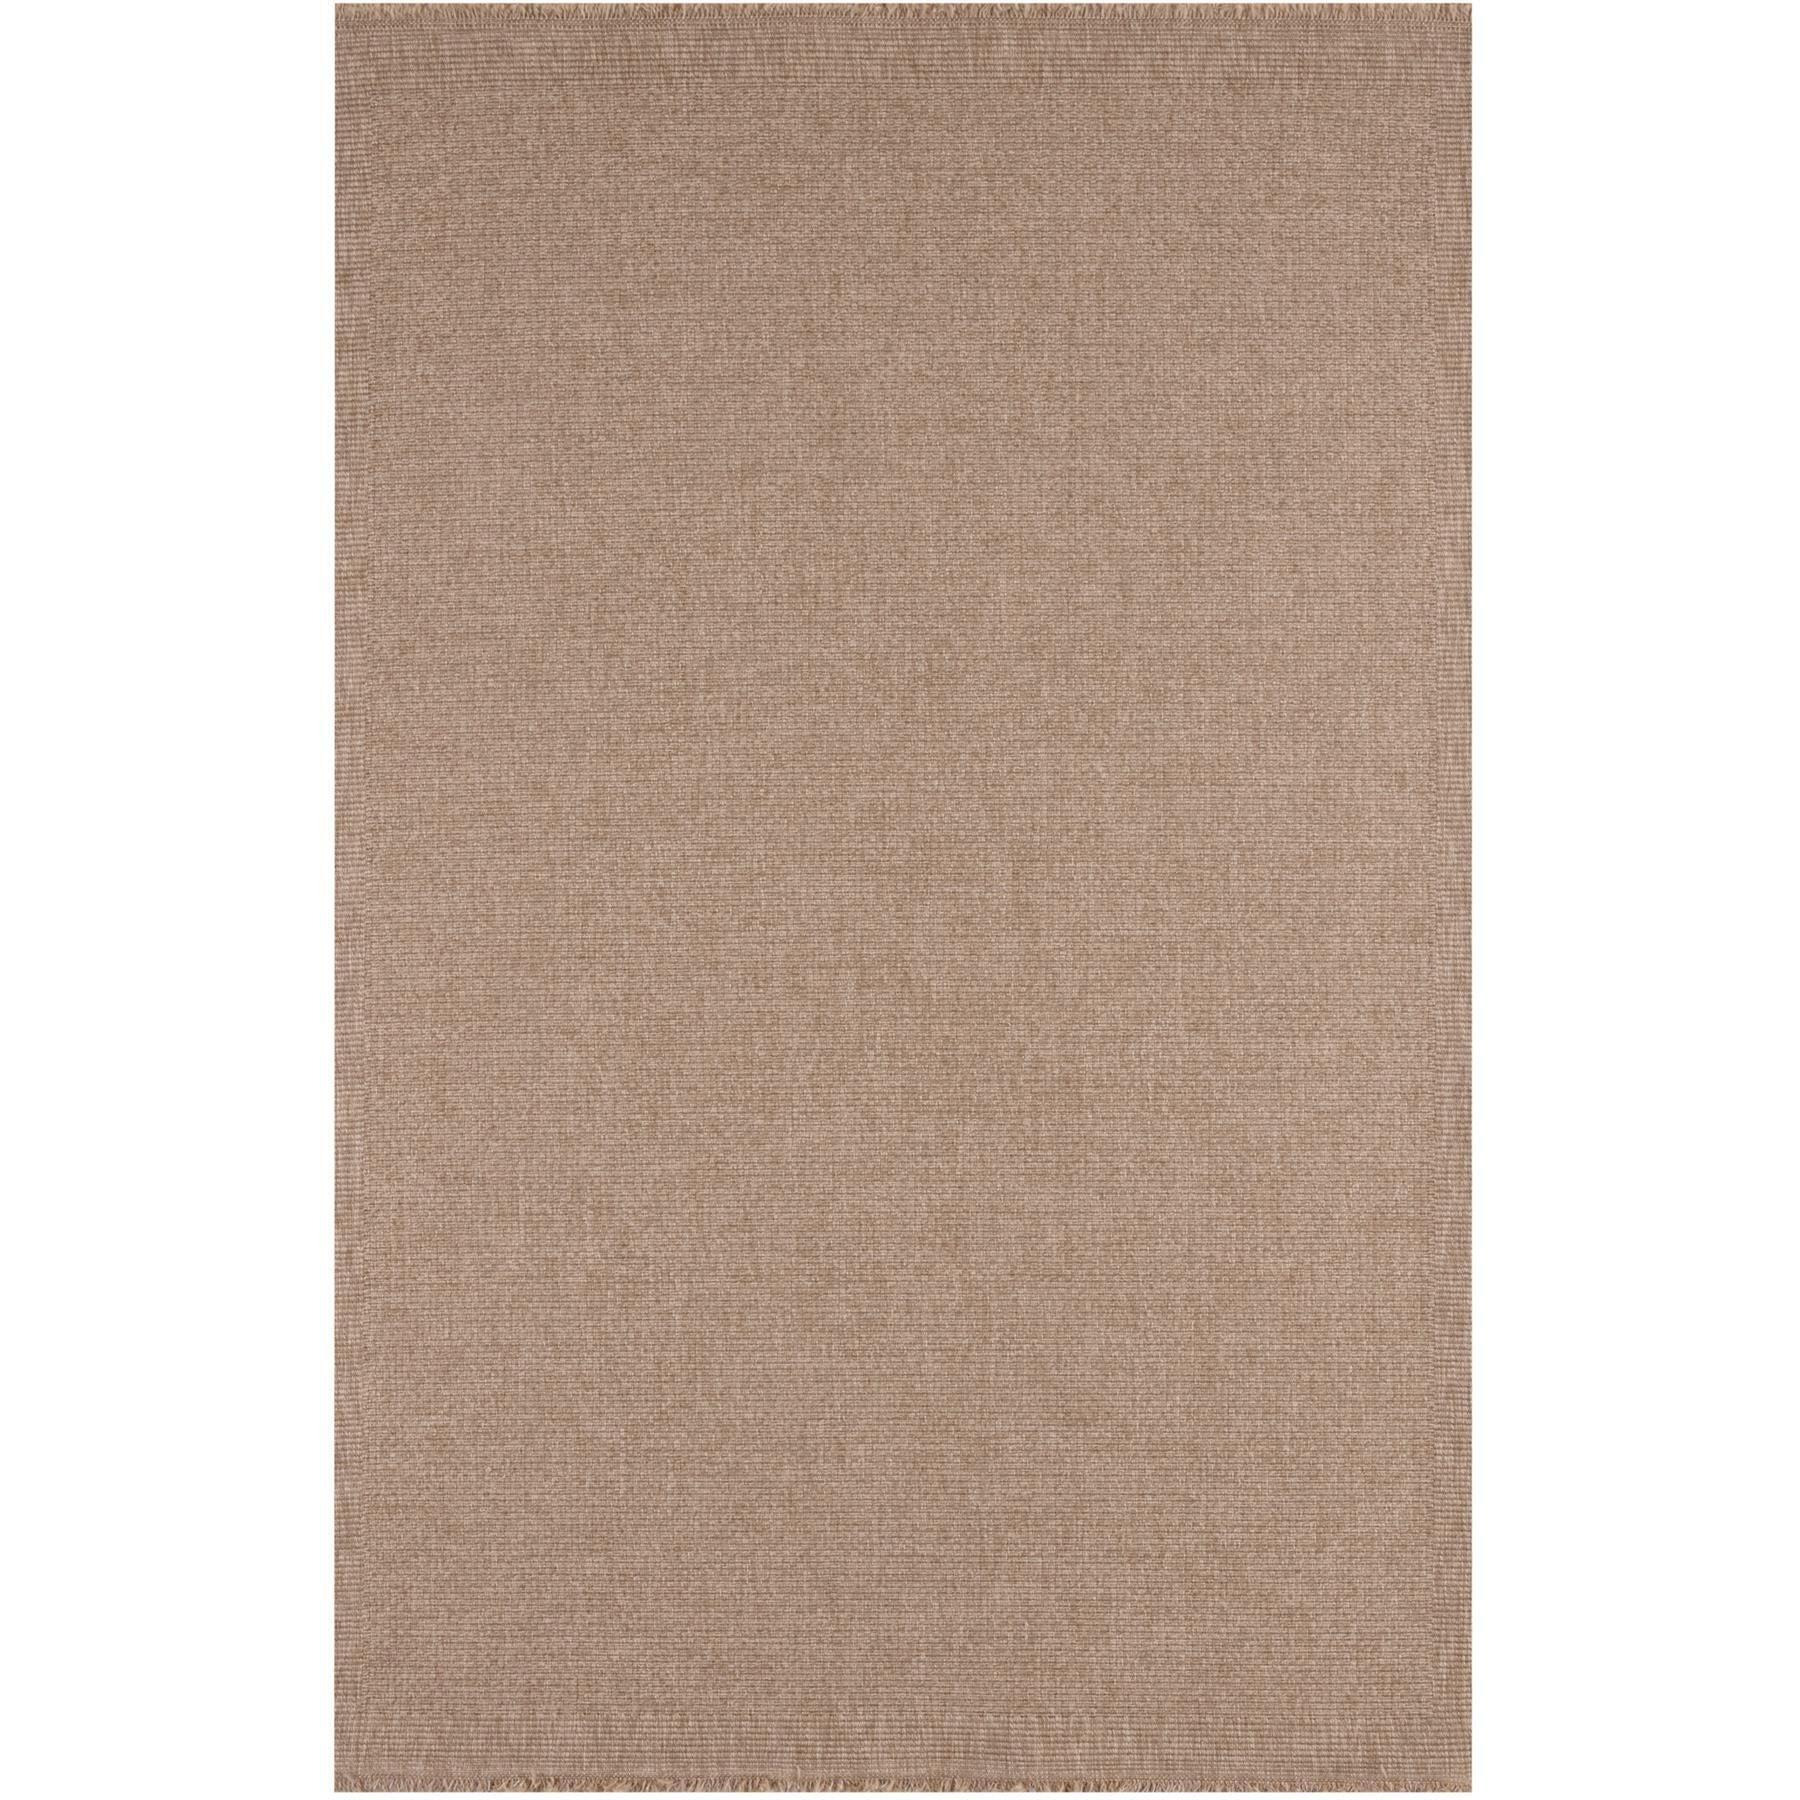 Nature Collection Outdoor Rugs in Neutral - 5200N - image 1